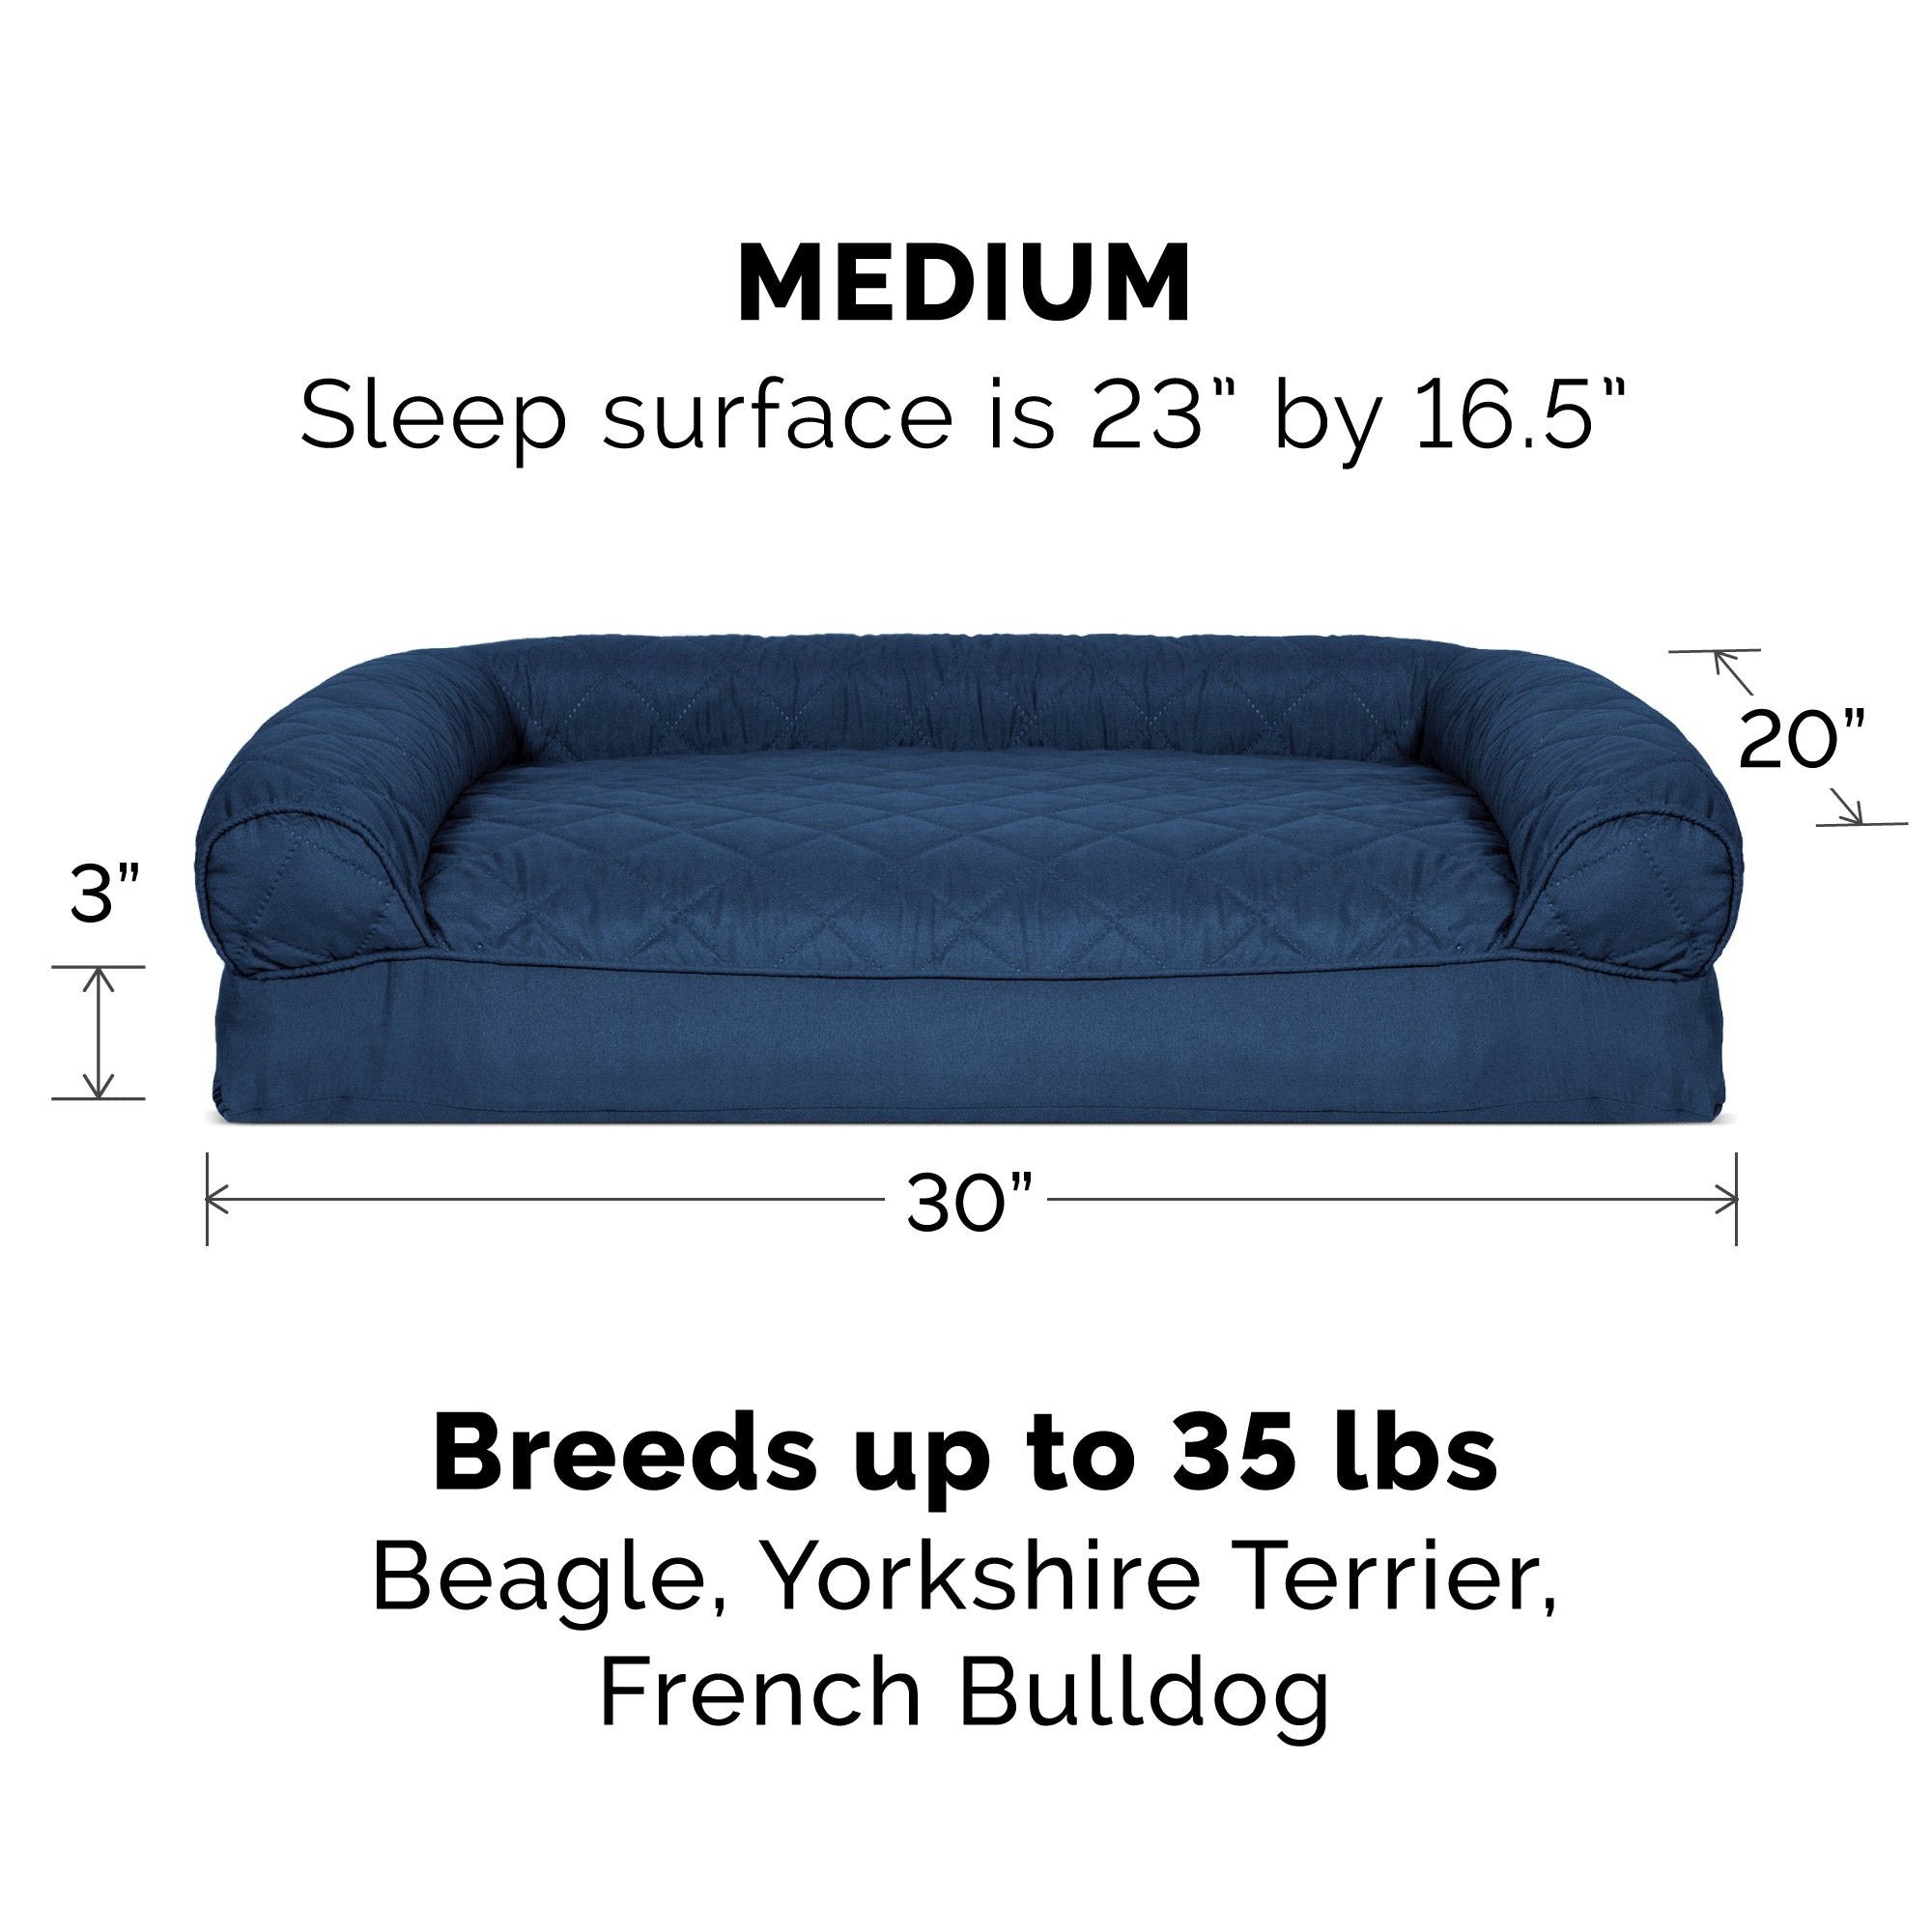 FurHaven | Quilted Pillow Sofa Pet Bed for Dogs and Cats， Navy， Medium